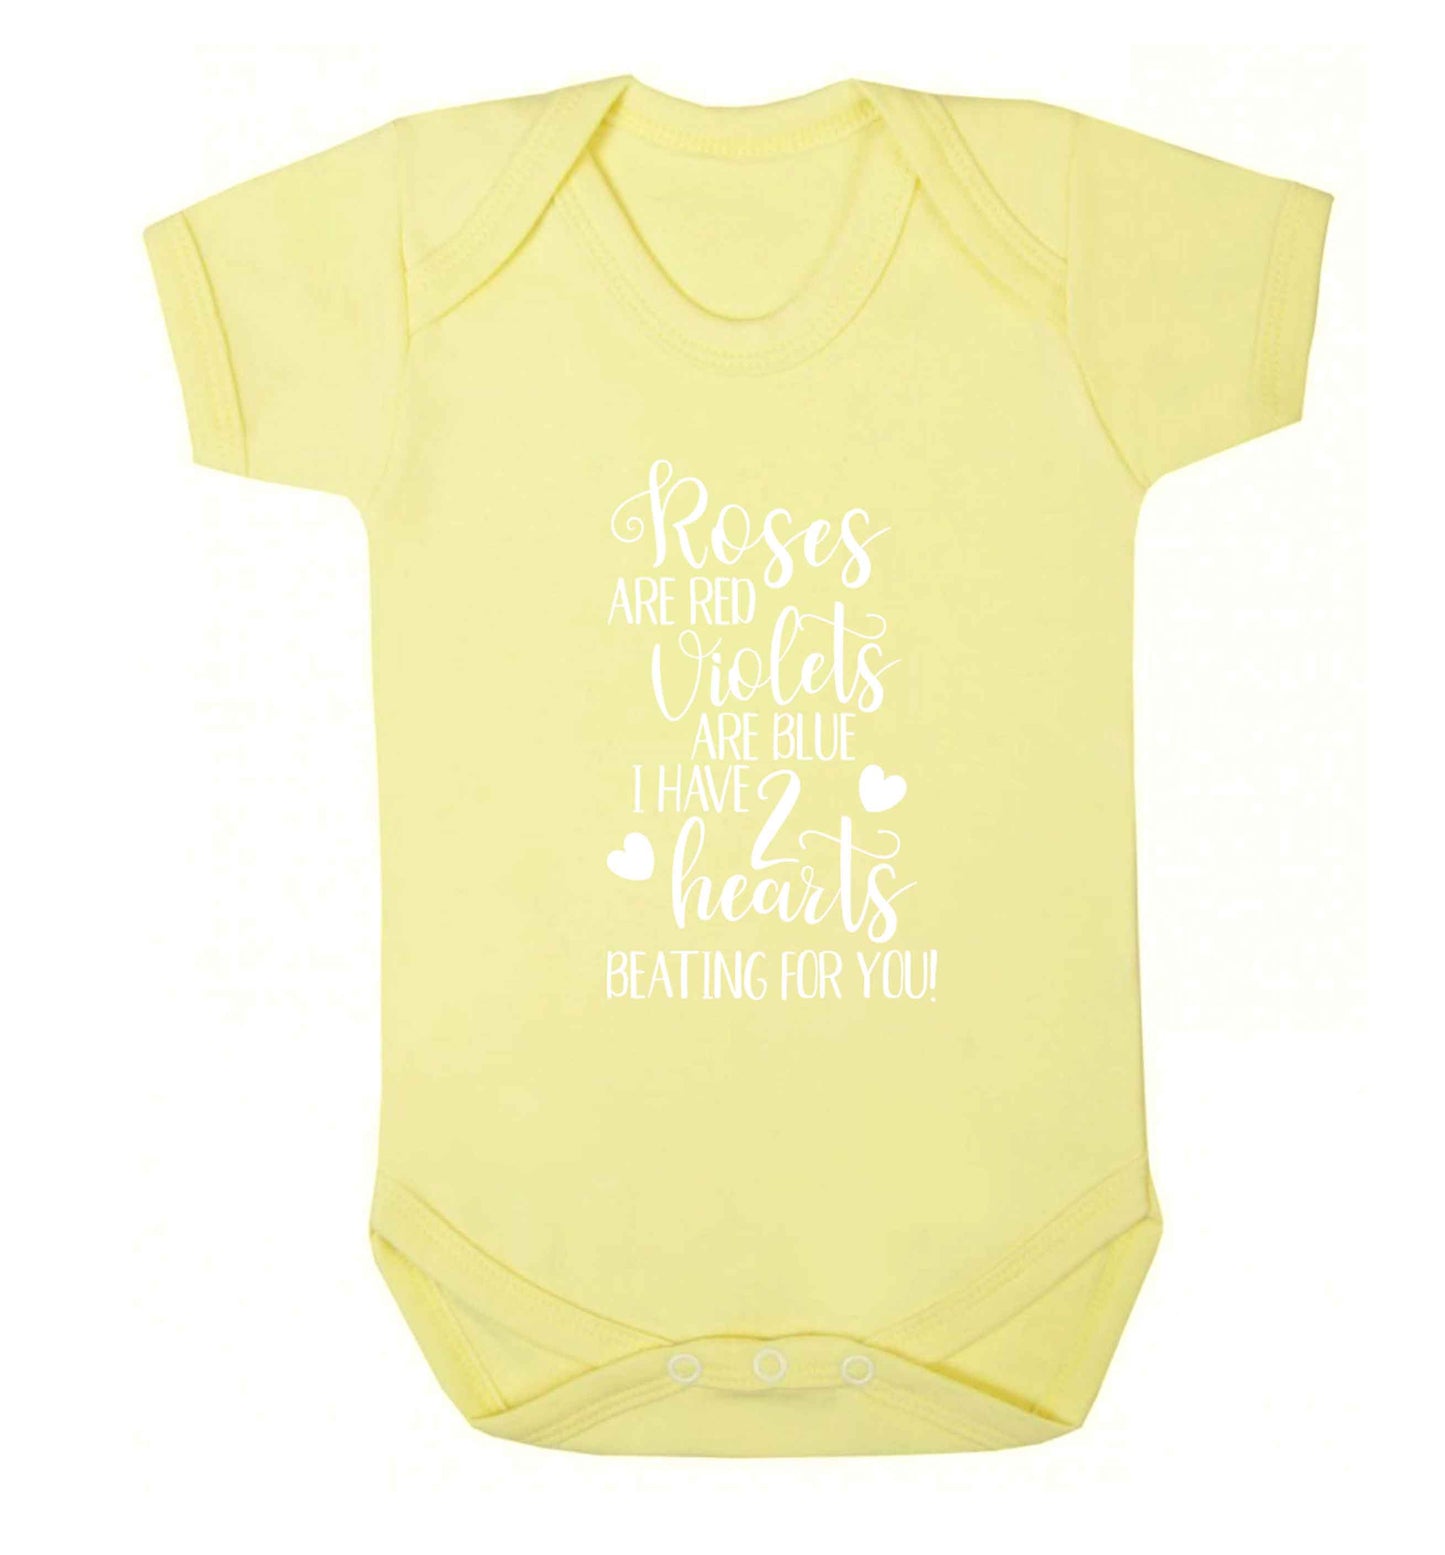 Roses are red violets are blue I have two hearts beating for you Baby Vest pale yellow 18-24 months